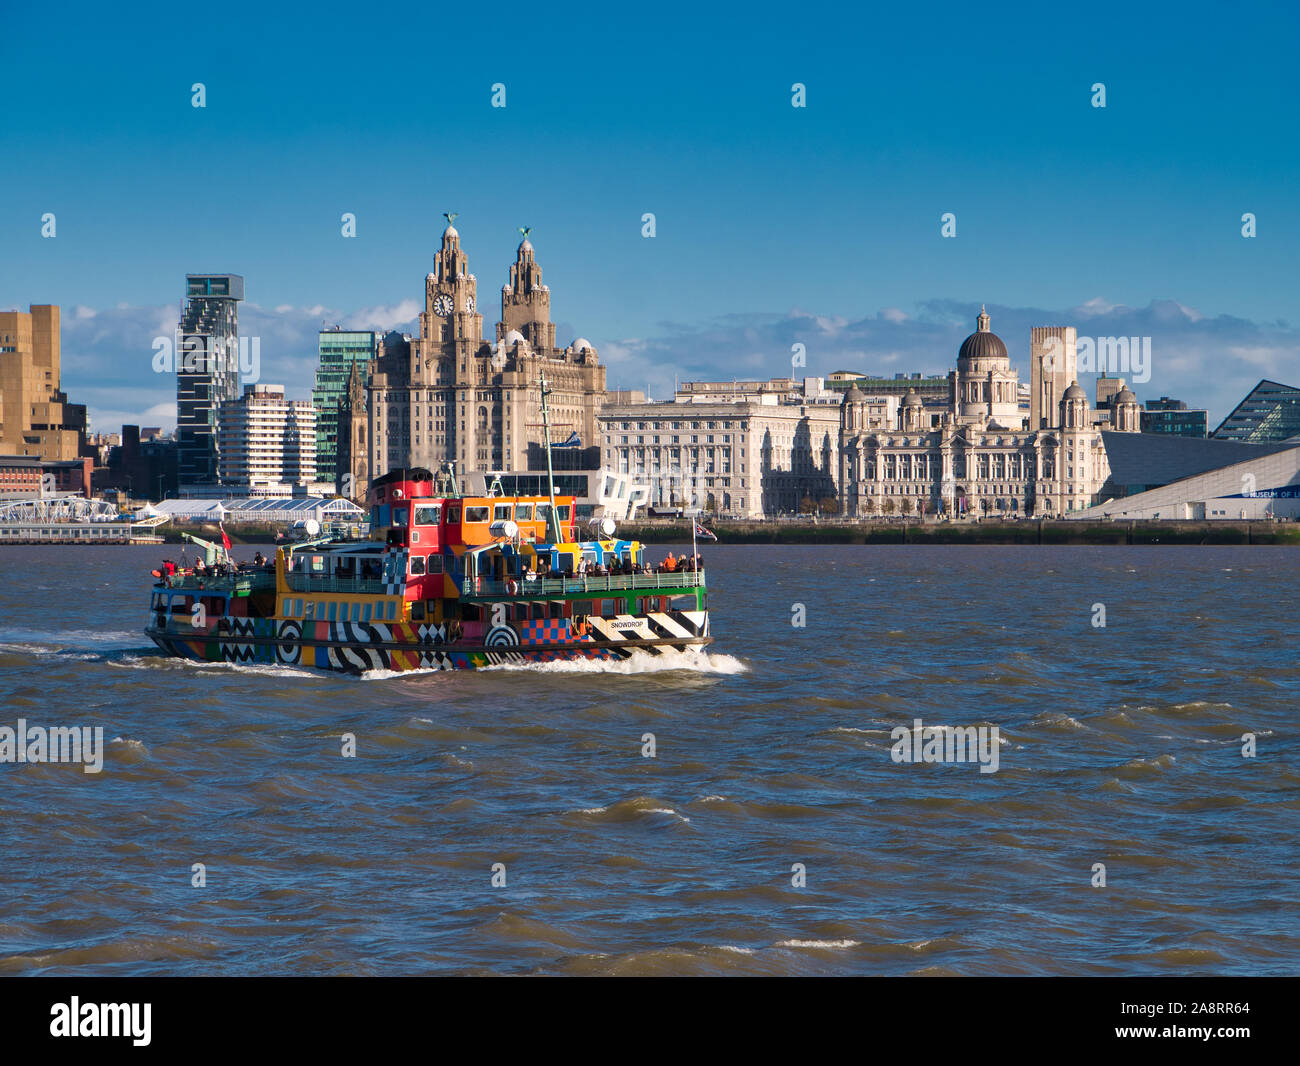 The River Mersey Ferry Snowdrop passes the Three Graces on the historic Liverpool waterfront on a sunny afternoon. Stock Photo